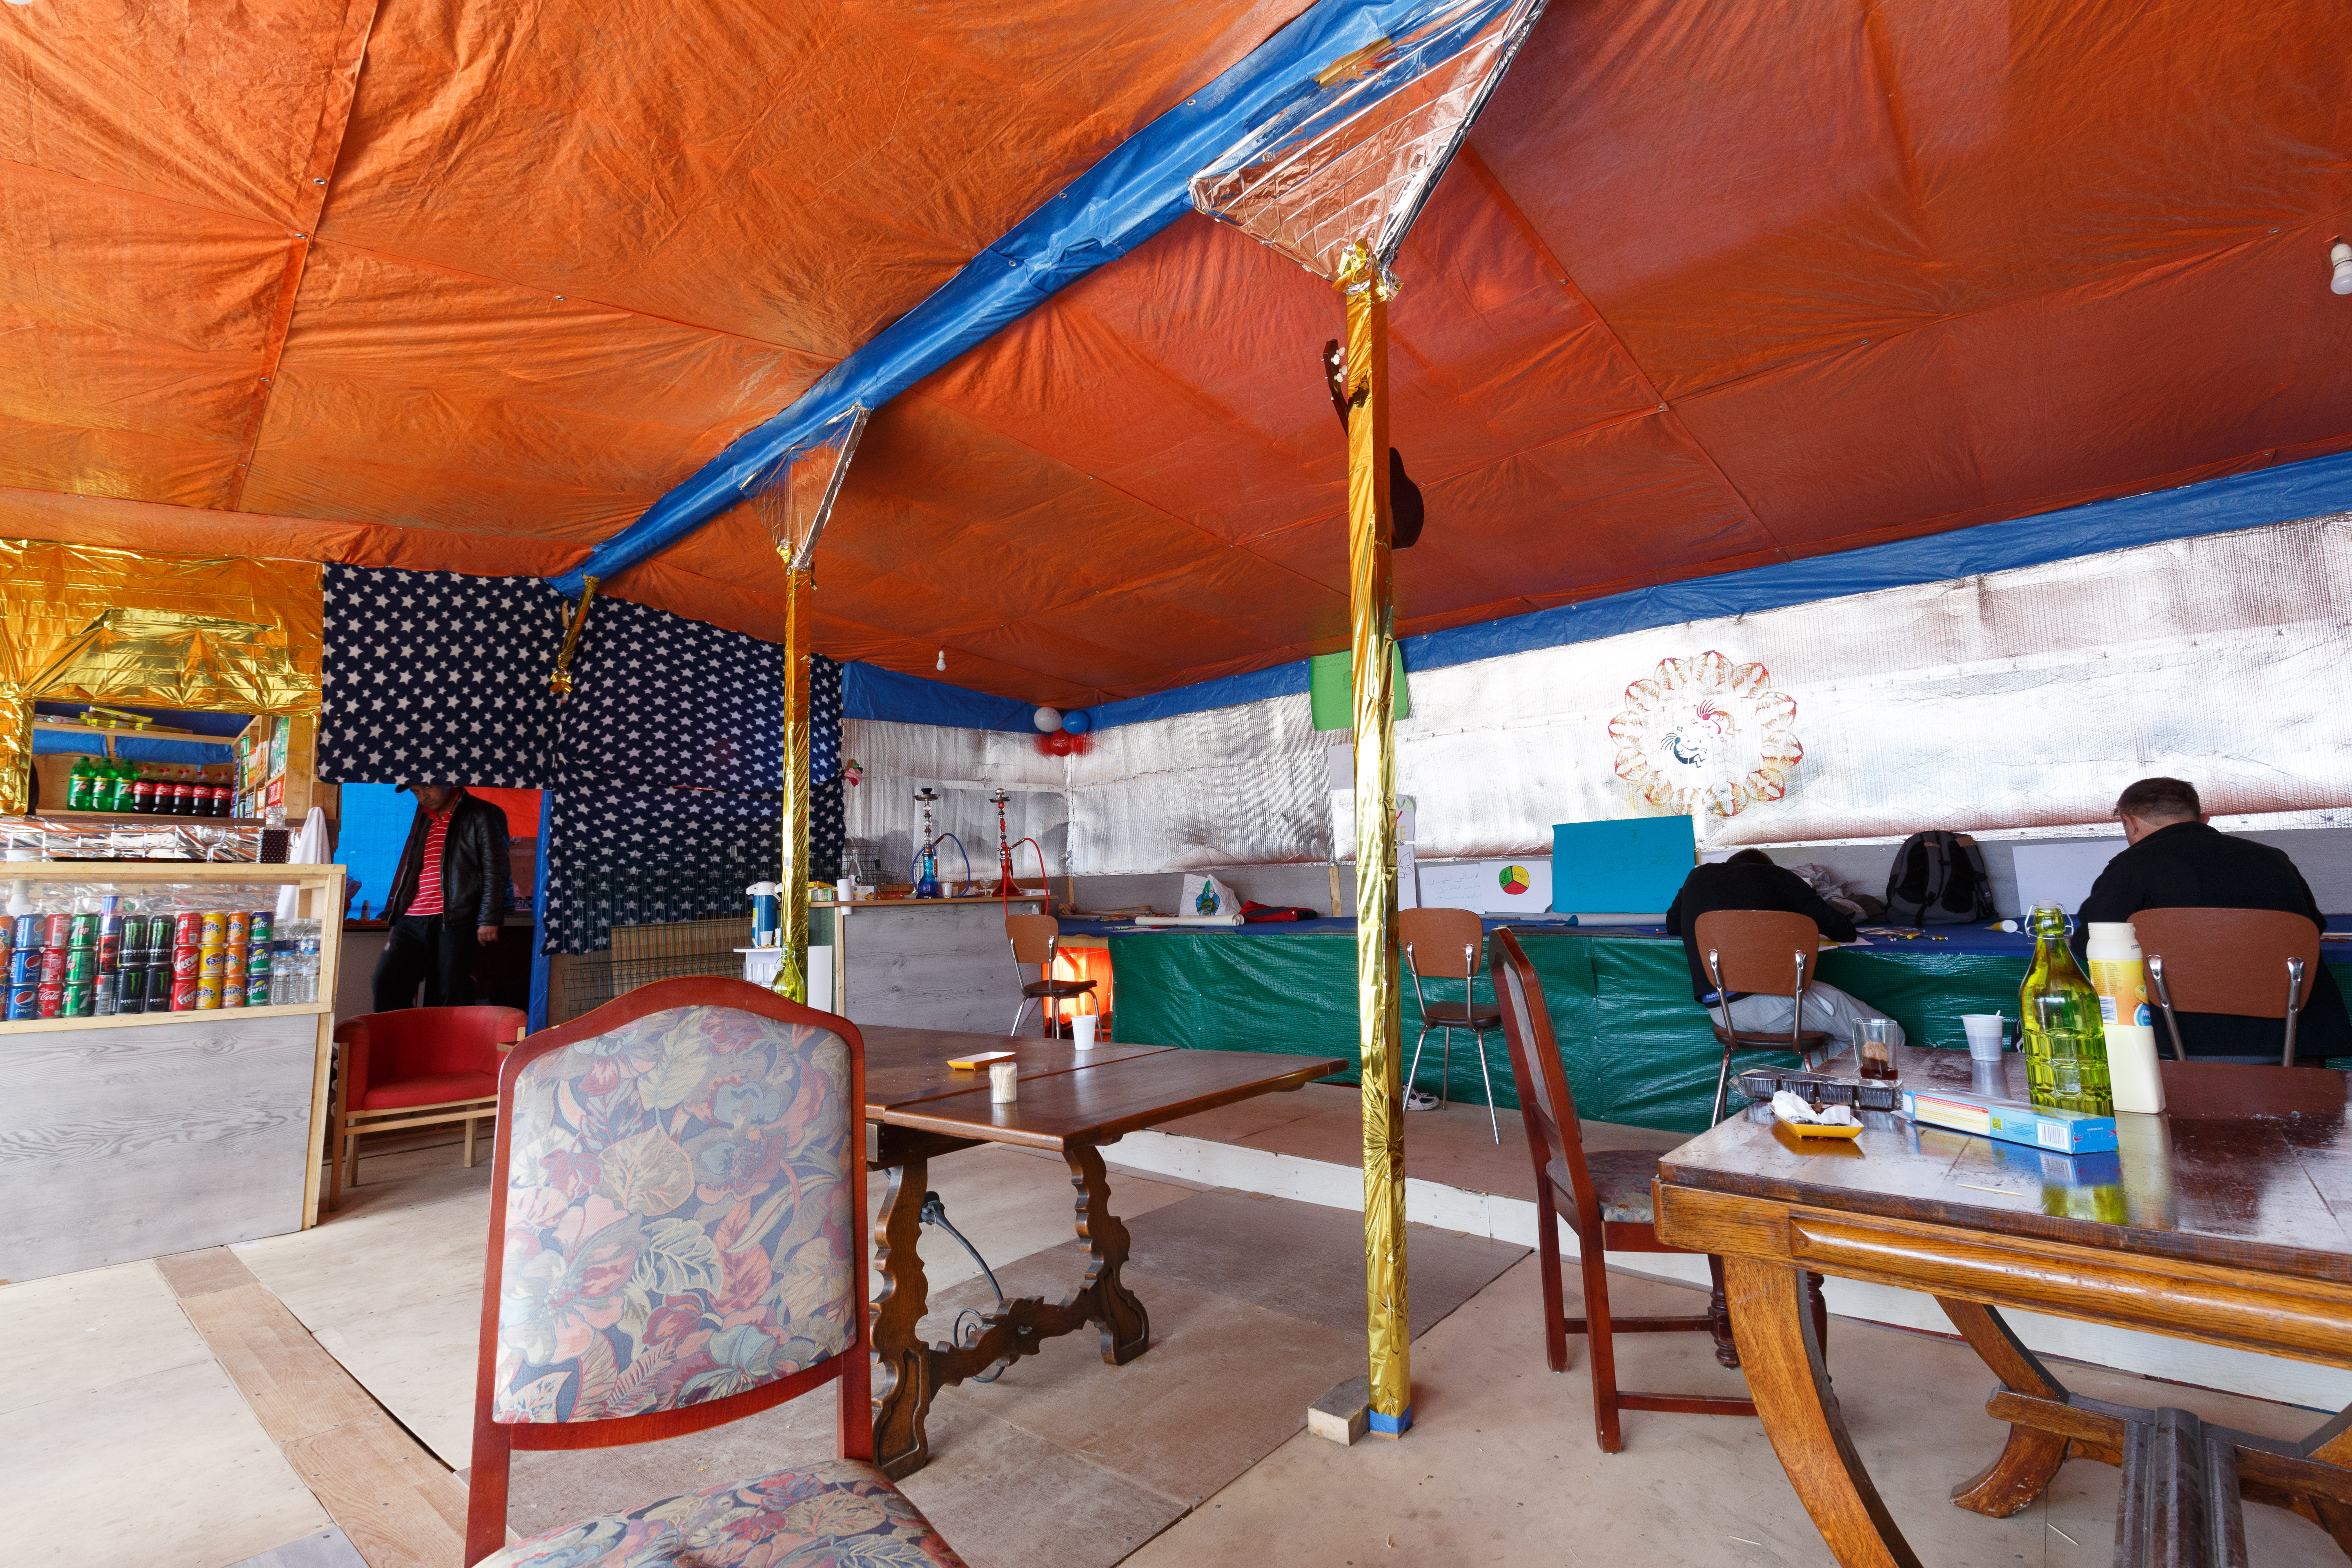 Sohail Ahmed's restaurant in the Jungle refugee camp in Calais, France